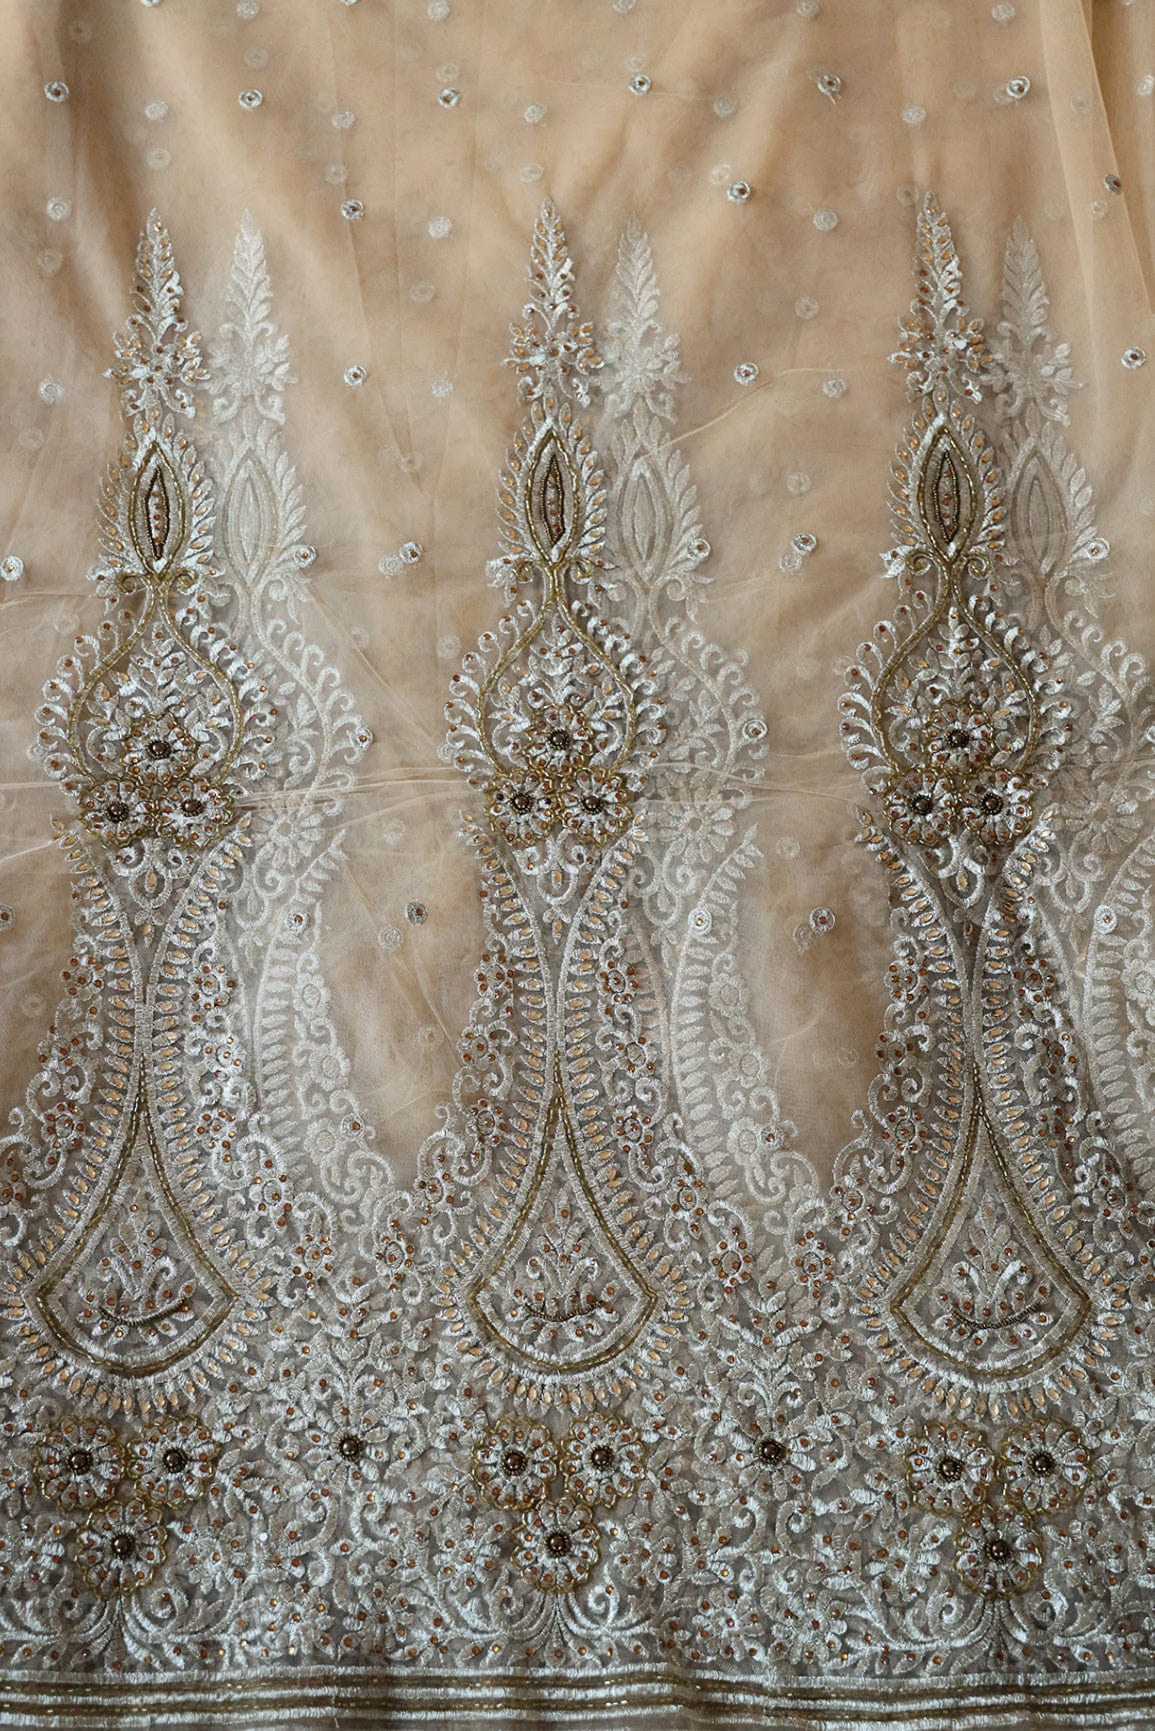 net fabric price,net fabric for dupatta,embroidered net fabric wholesale,golden embroidered net fabric,golden embroidery fabric,silk net fabric,net fabric for blouse